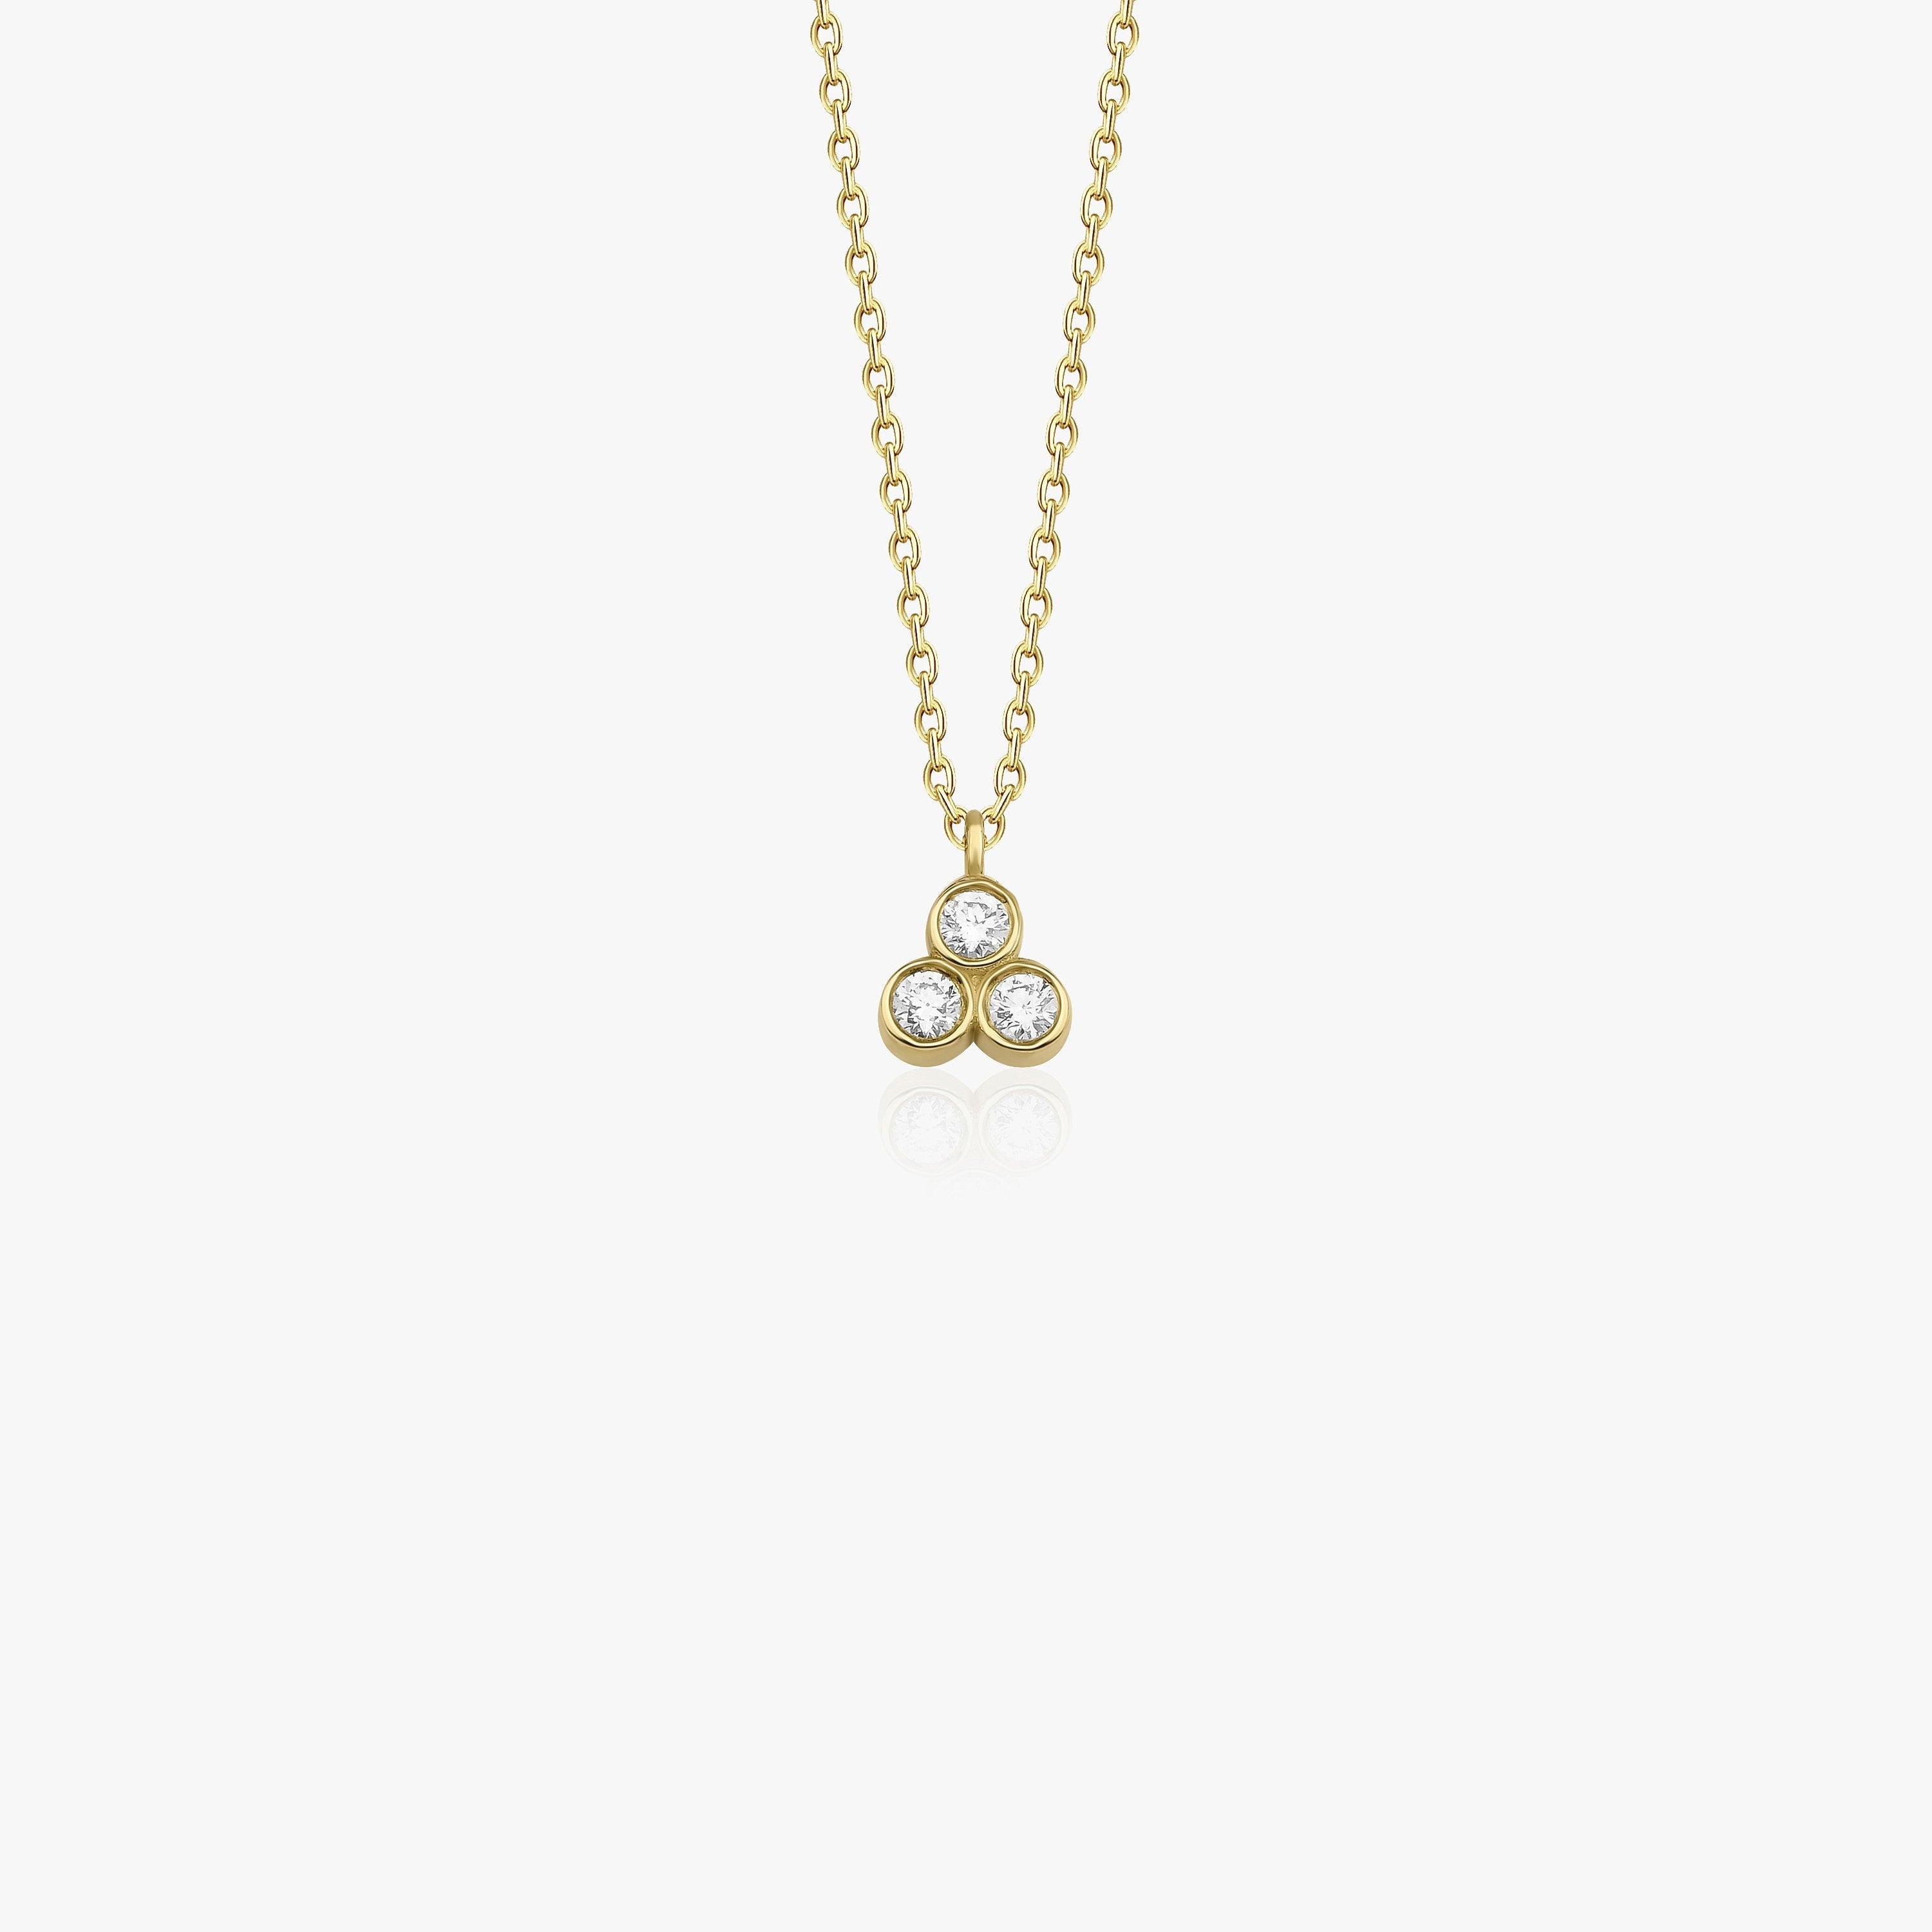 Bezel Set Three Diamond Necklace Available in 14K and 18K Gold